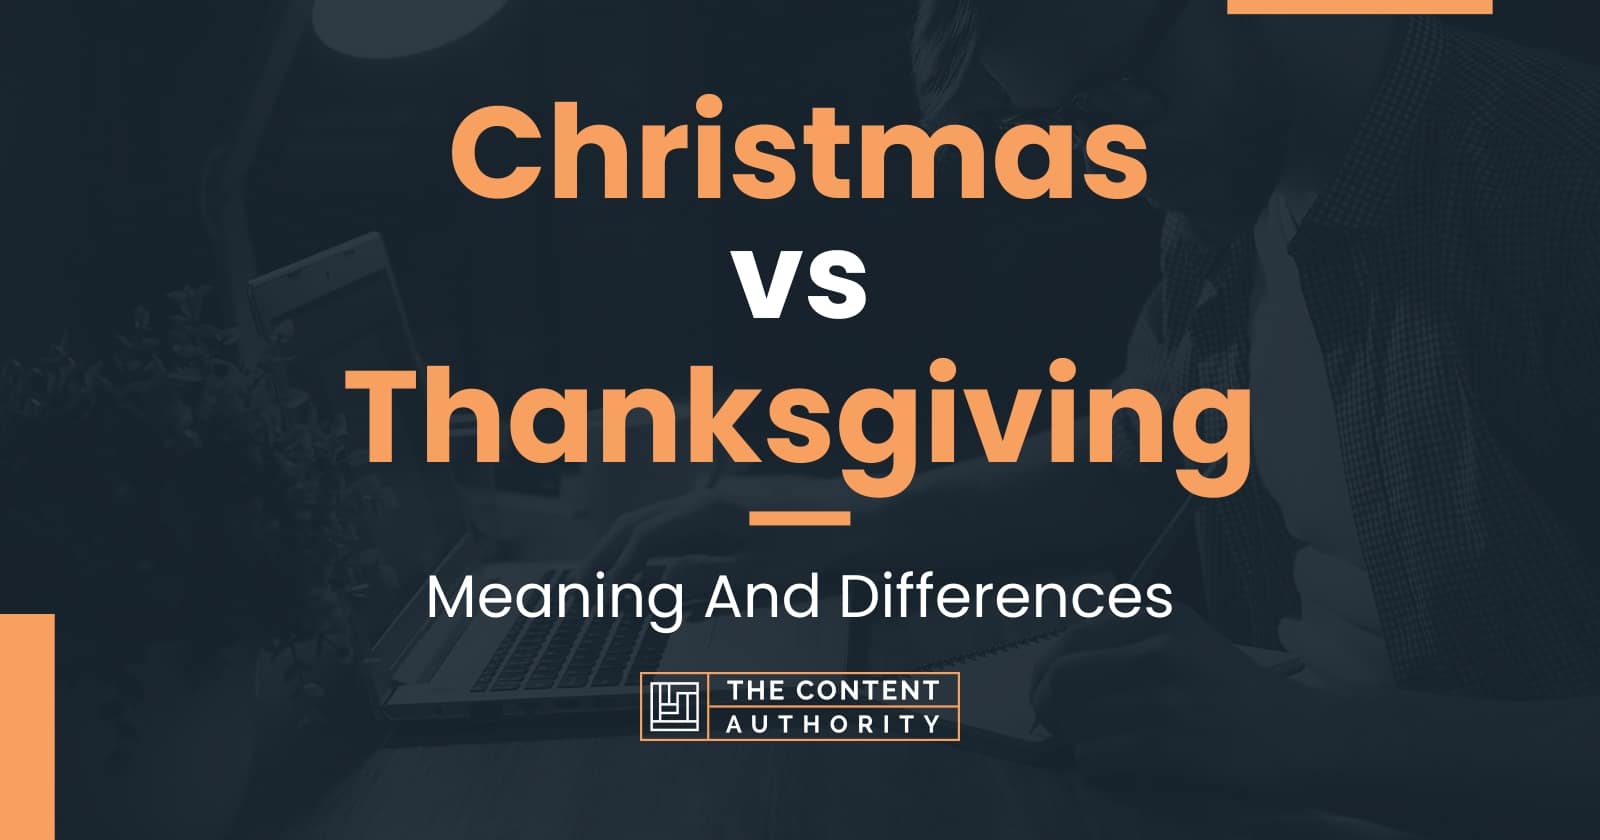 Christmas vs Thanksgiving Meaning And Differences